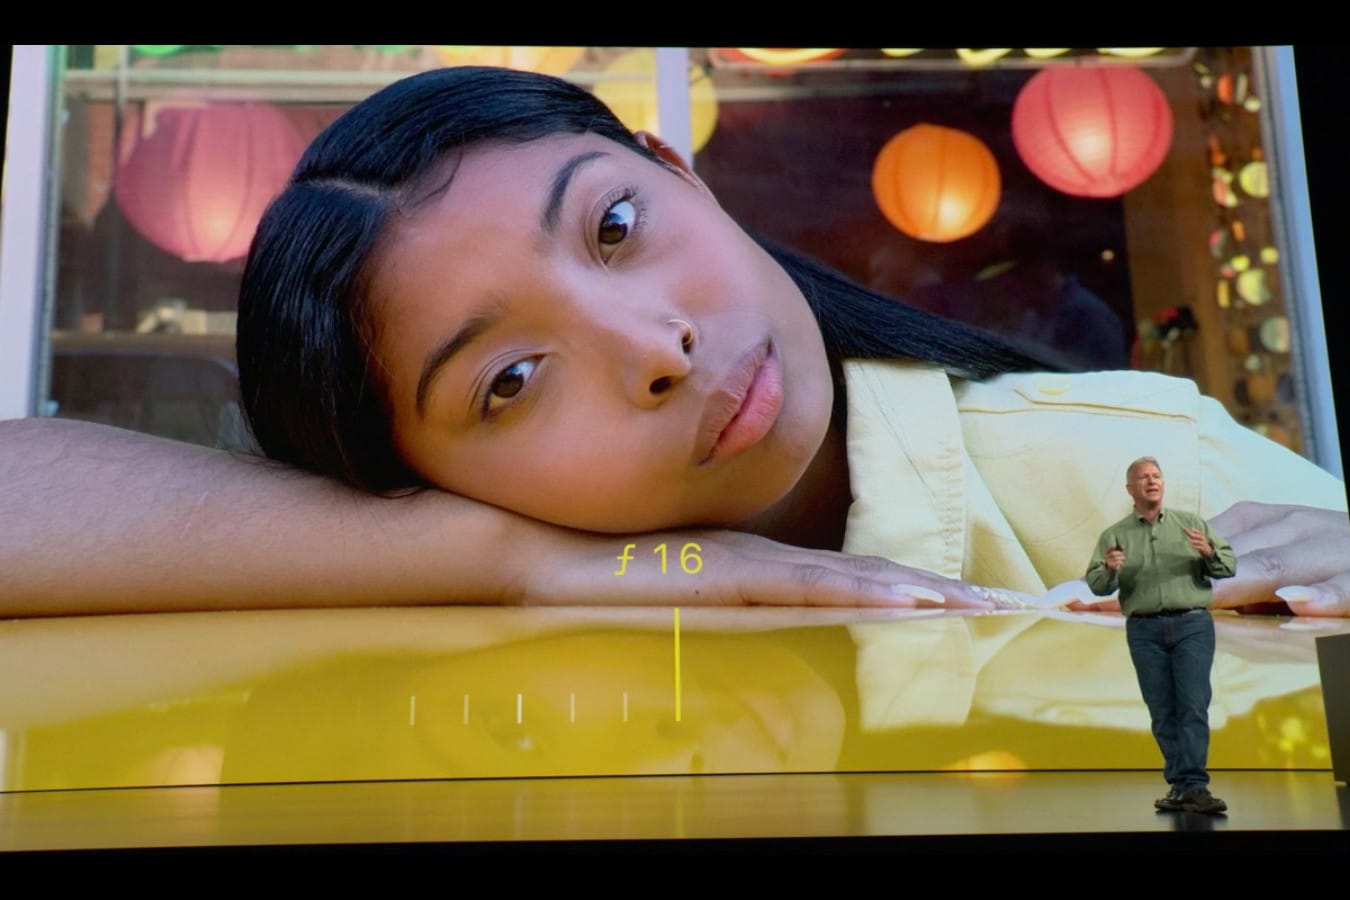 Apple’s New iPhone XS Can Adjust Depth of Field After Shooting